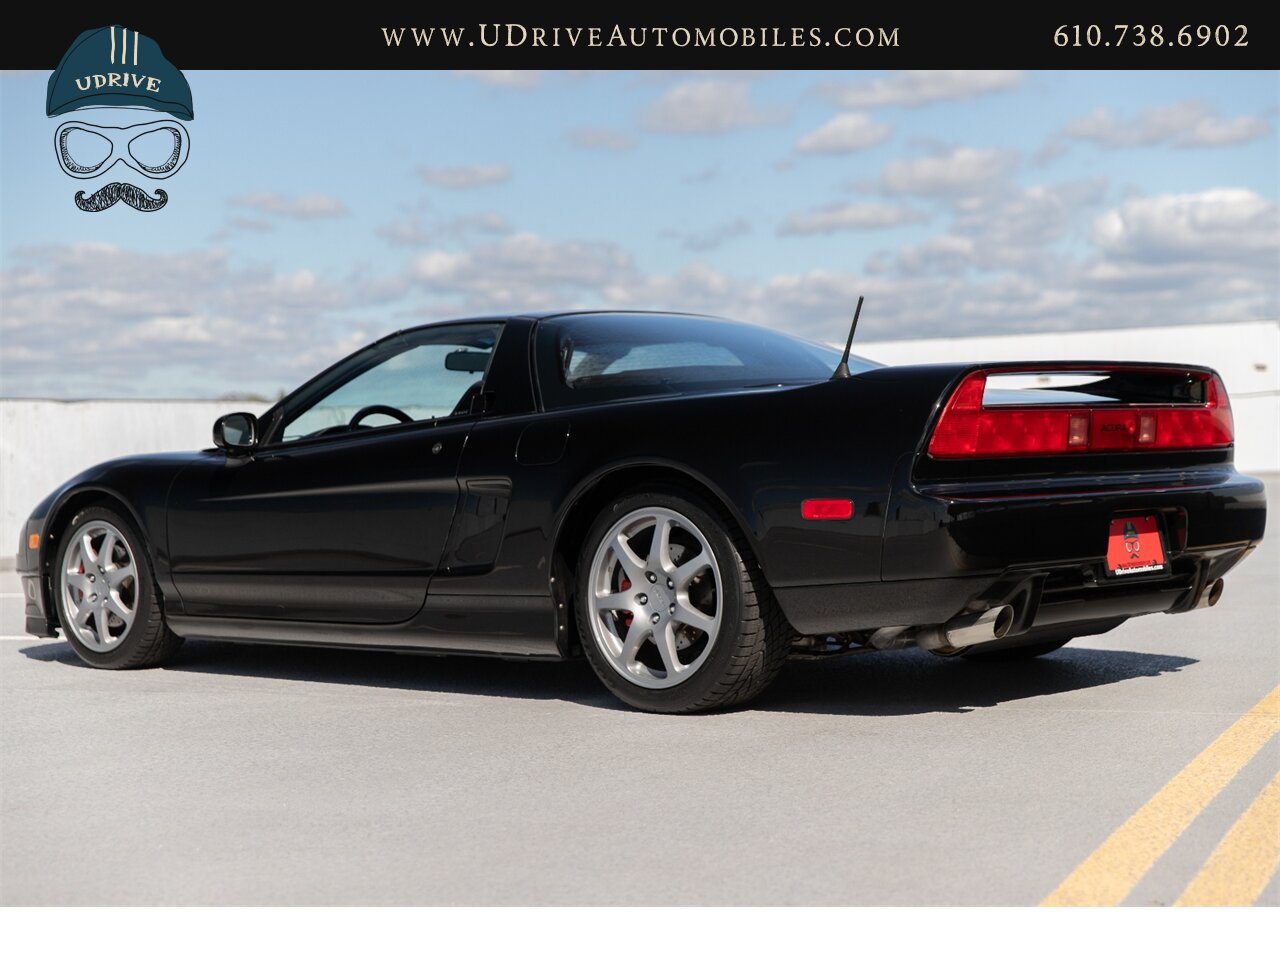 1996 Acura NSX NSX-T  5 Speed Manual Fresh Timing Belt Service - Photo 26 - West Chester, PA 19382